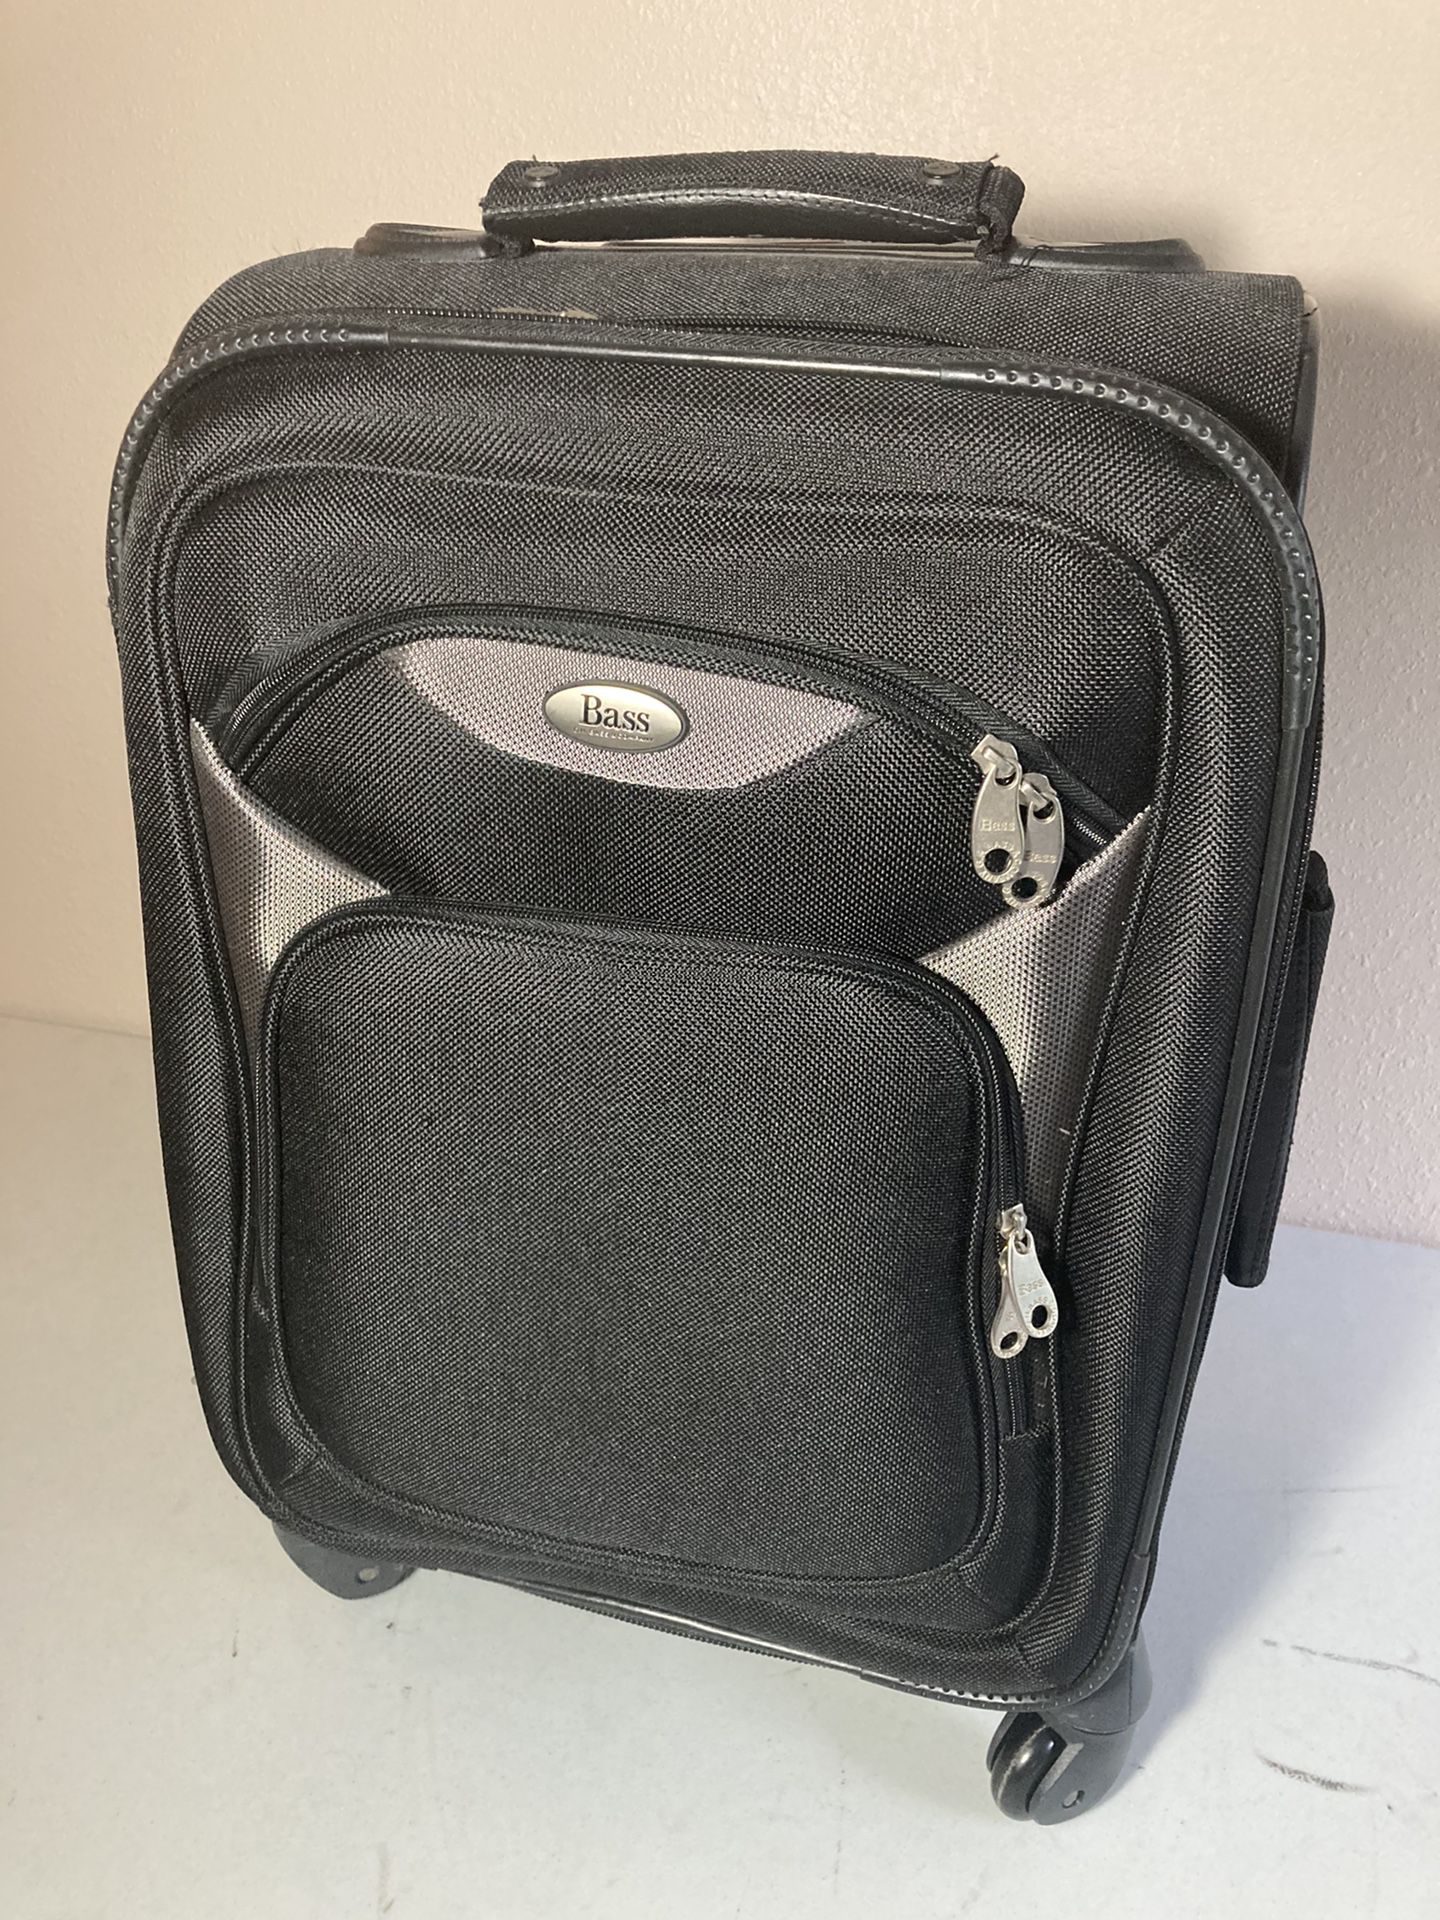 Black carry on luggage (GH Bass & Co)